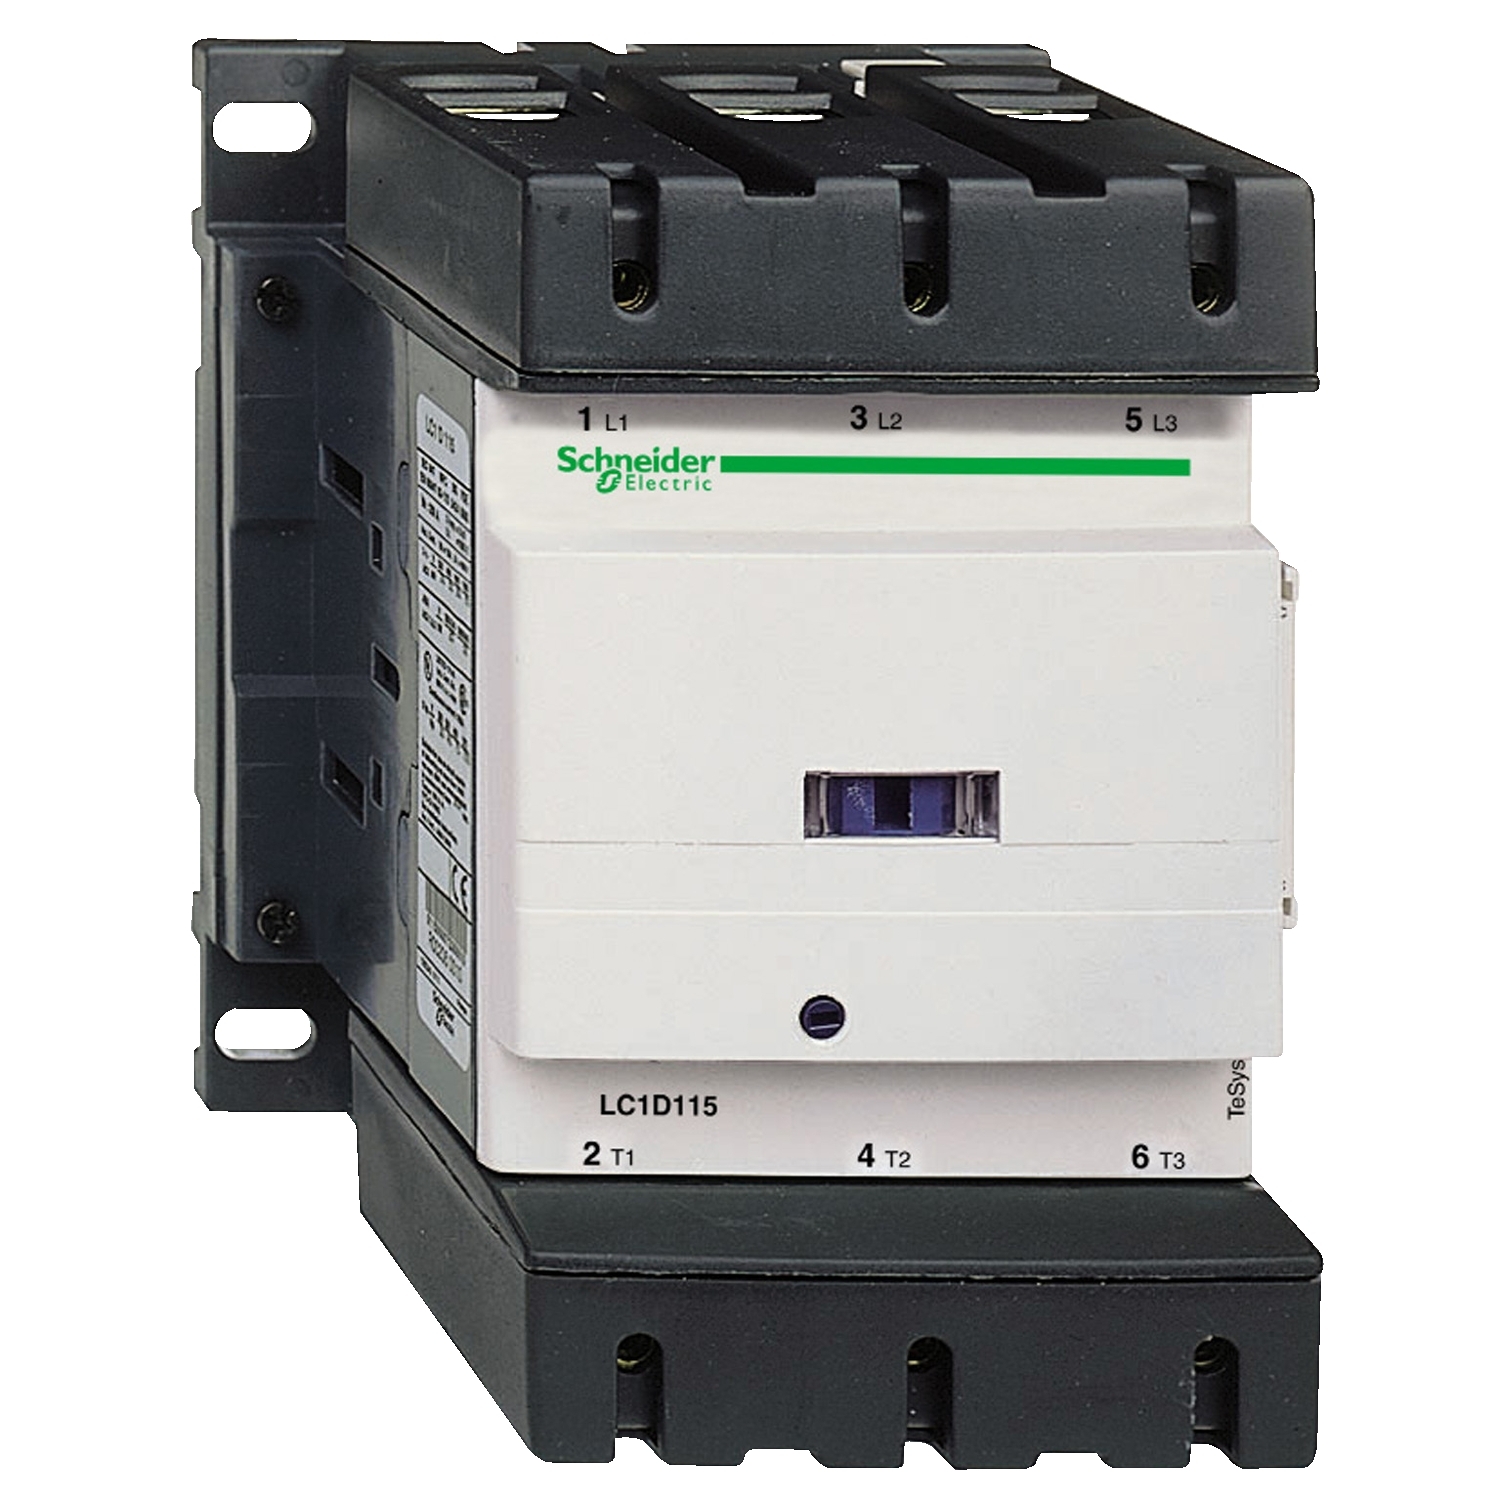 Contactor, TeSys Deca, 3P(3NO), AC-3/AC-3e, <lt/>=440V, 115A, 240V AC 50/60Hz coil, lugs/bars terminals